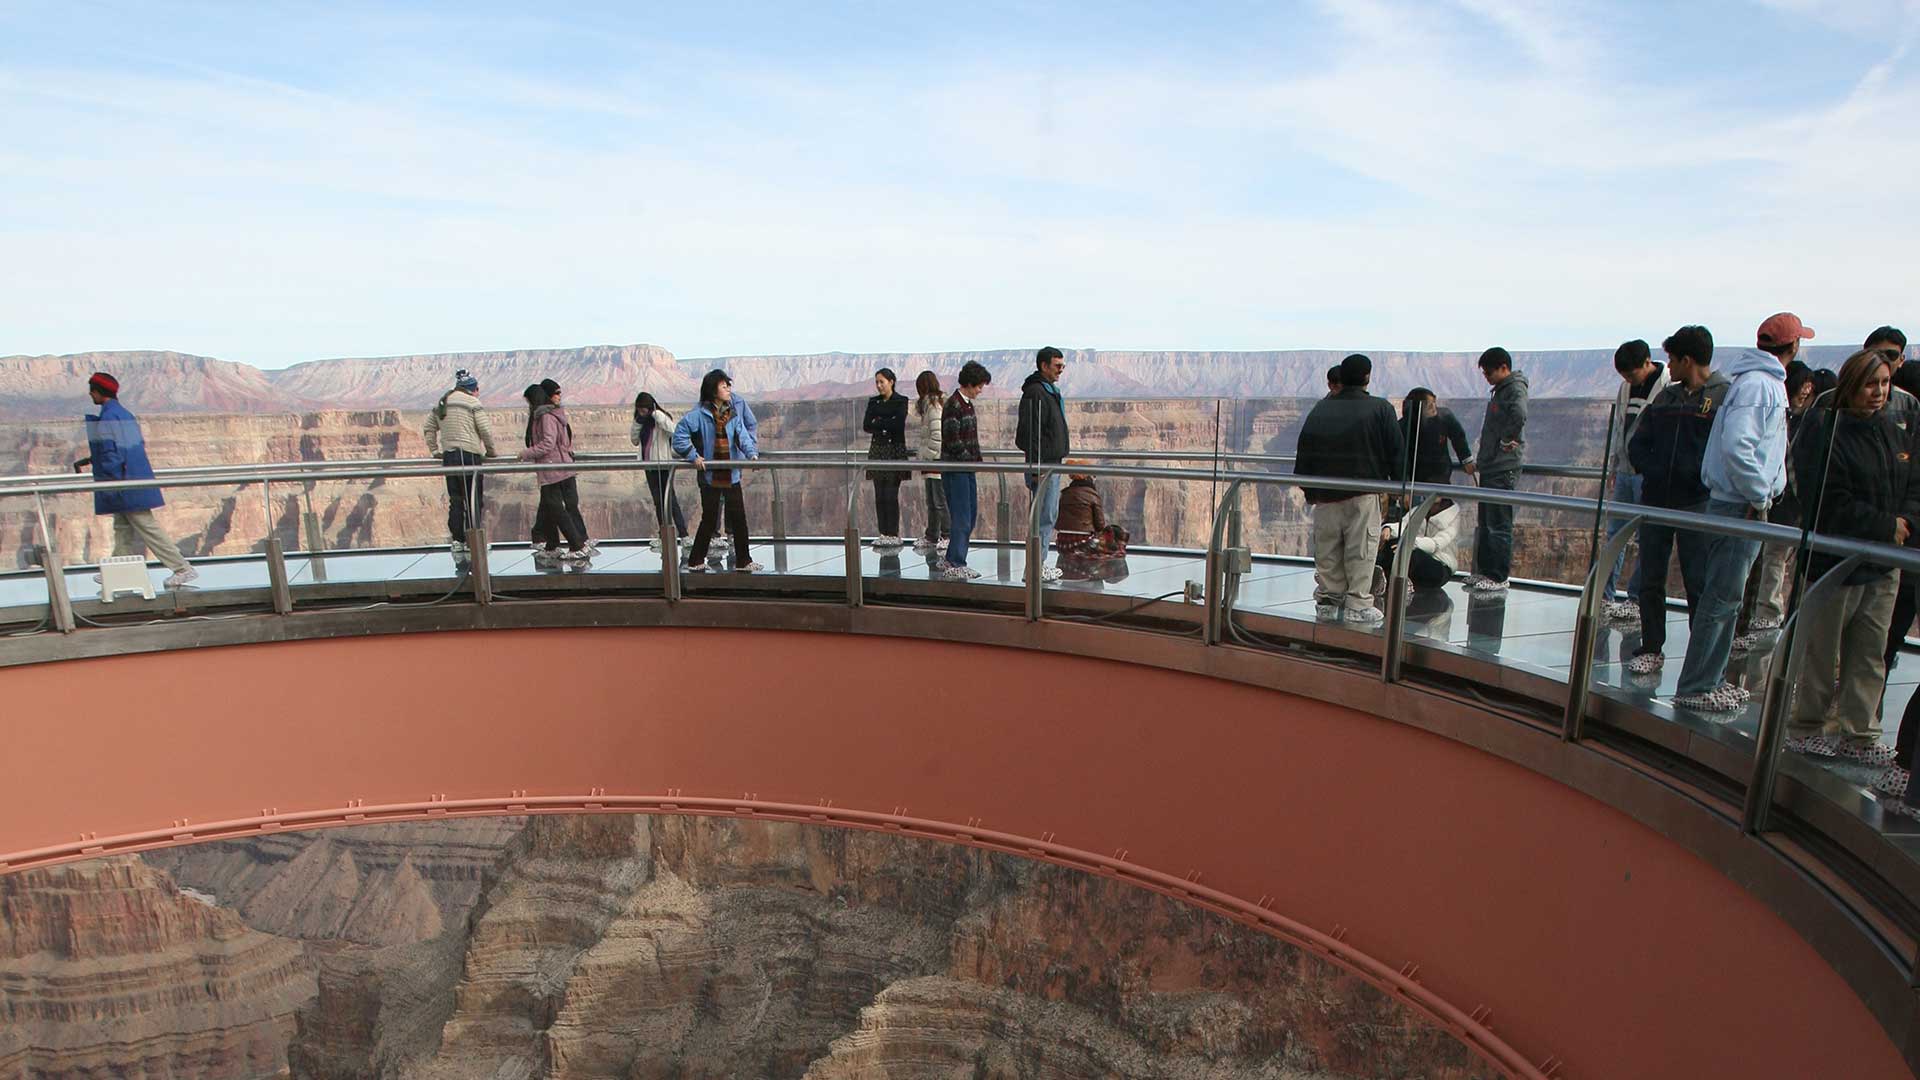 Visitors to the Grand Canyon West stand atop the Skywalk Bridge with canyon scenery behind them.